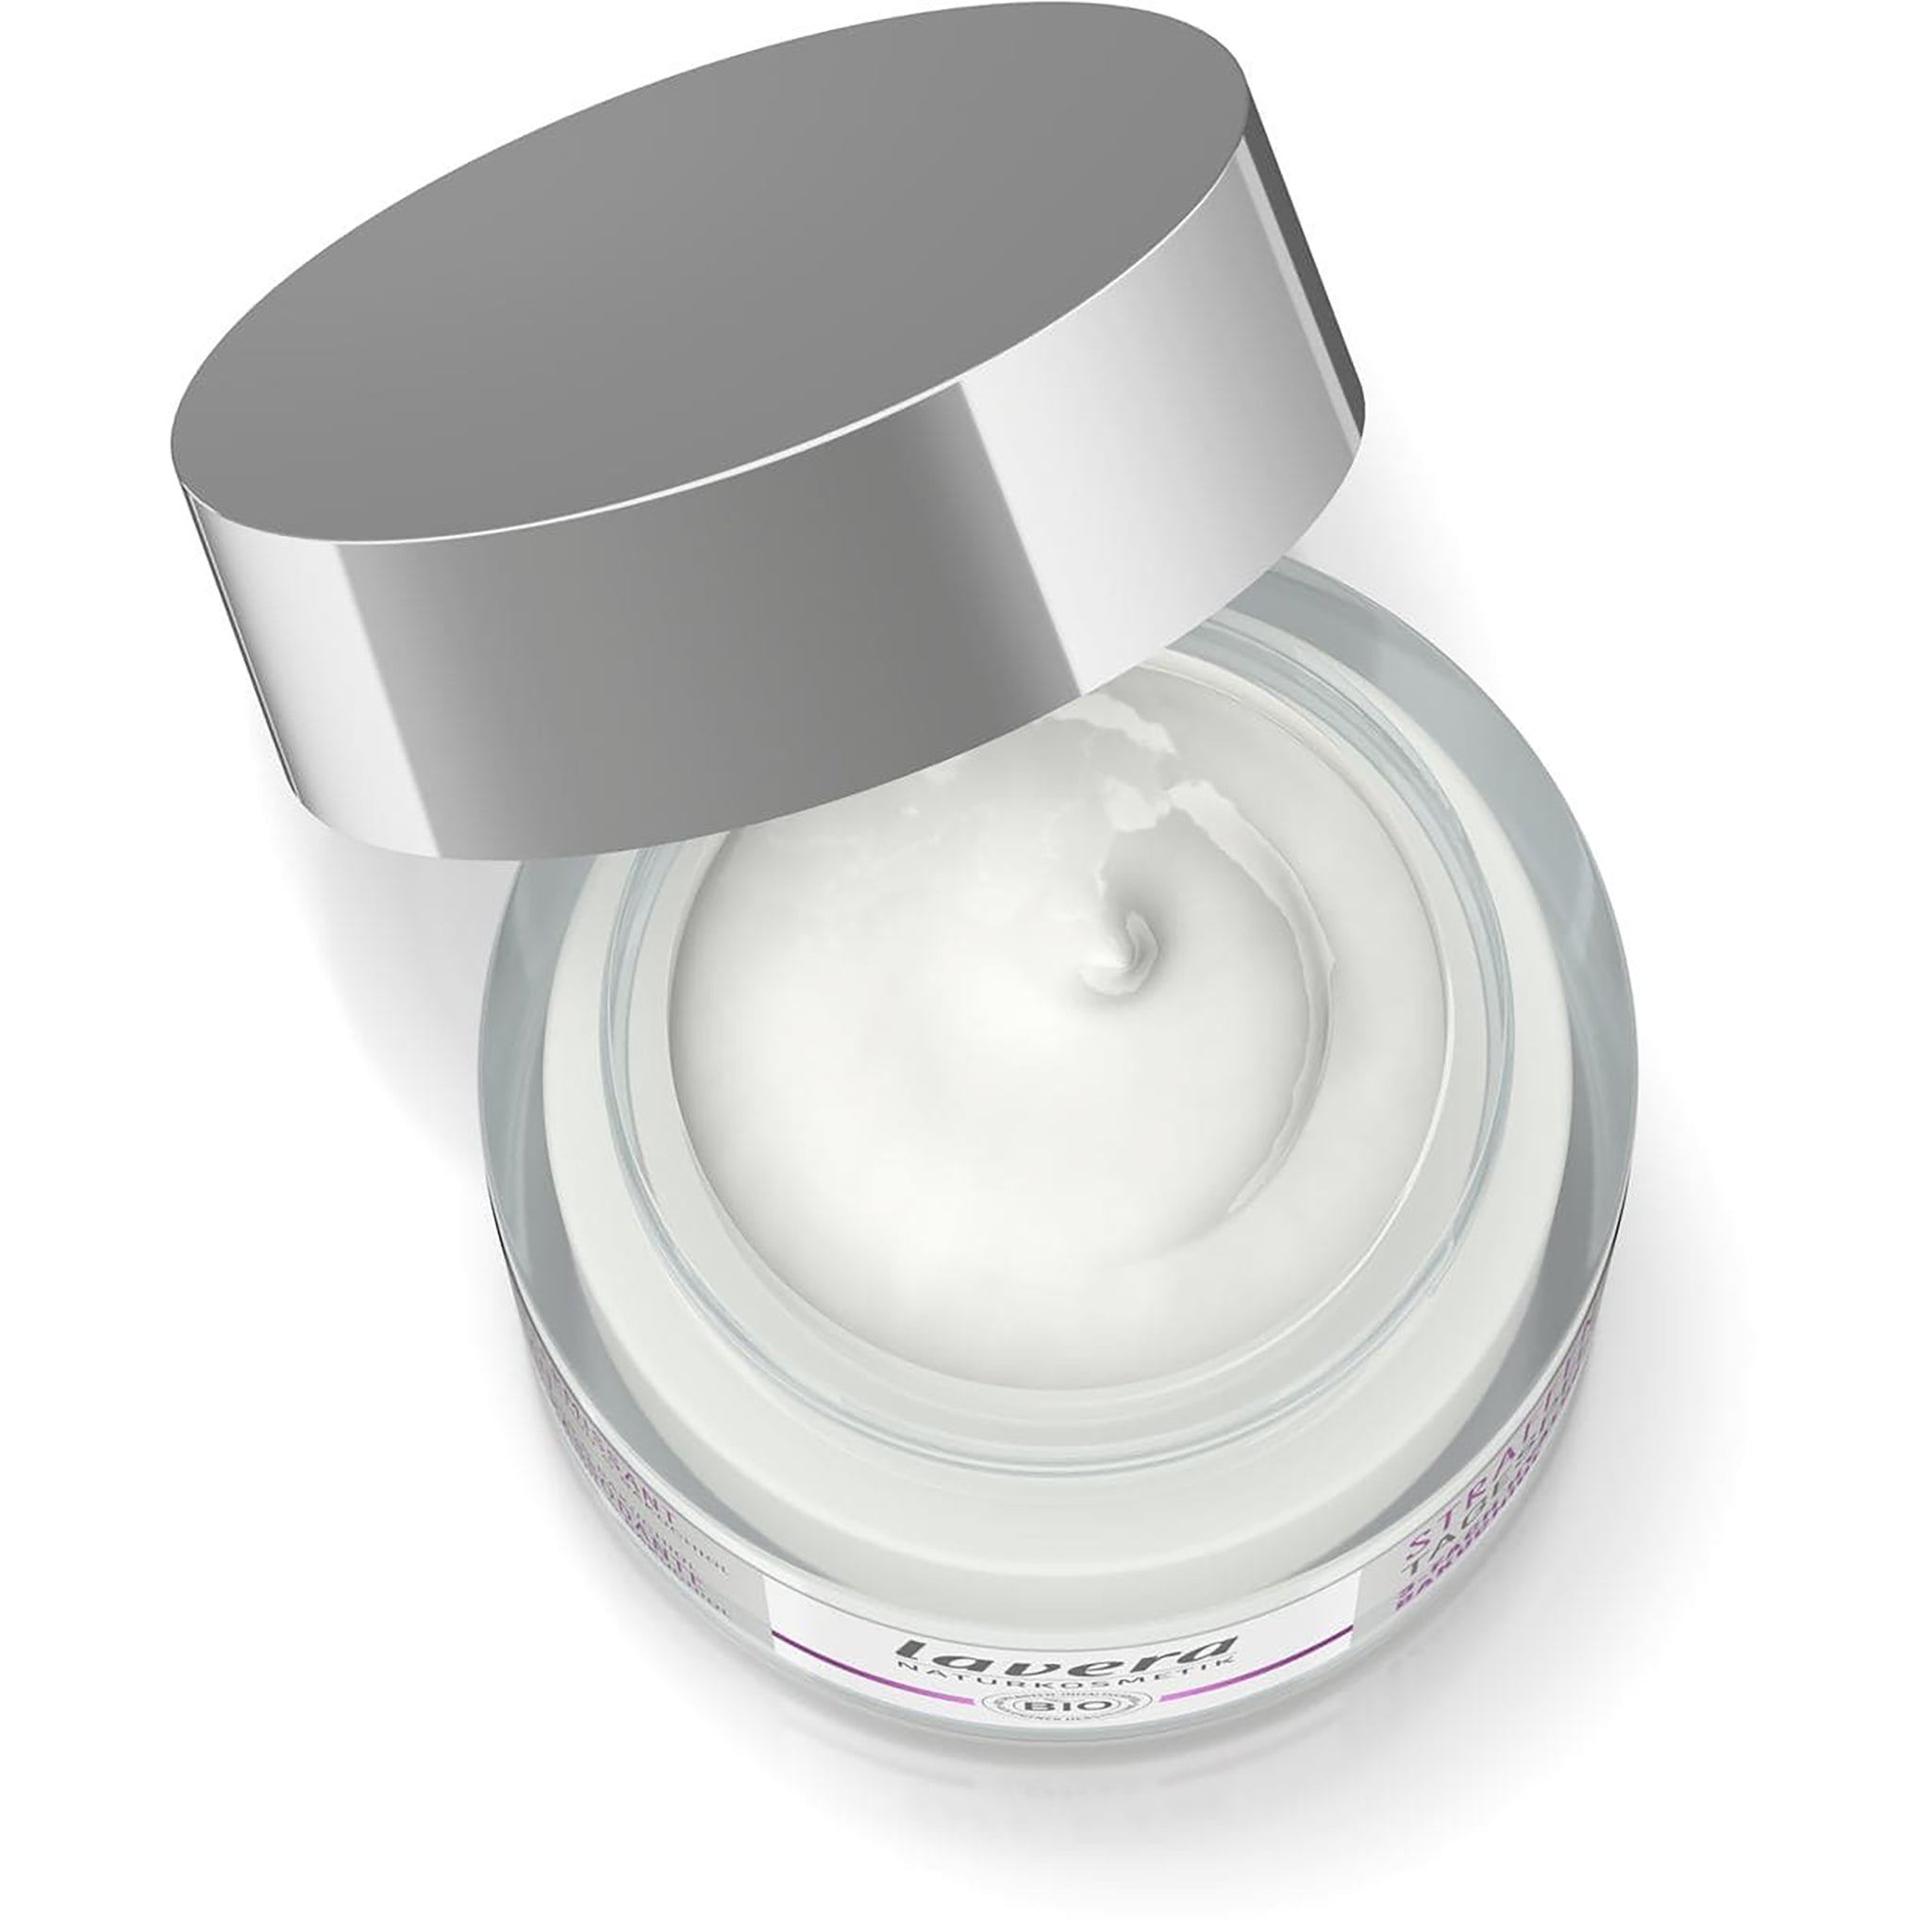 Firming Day Cream - mypure.co.uk